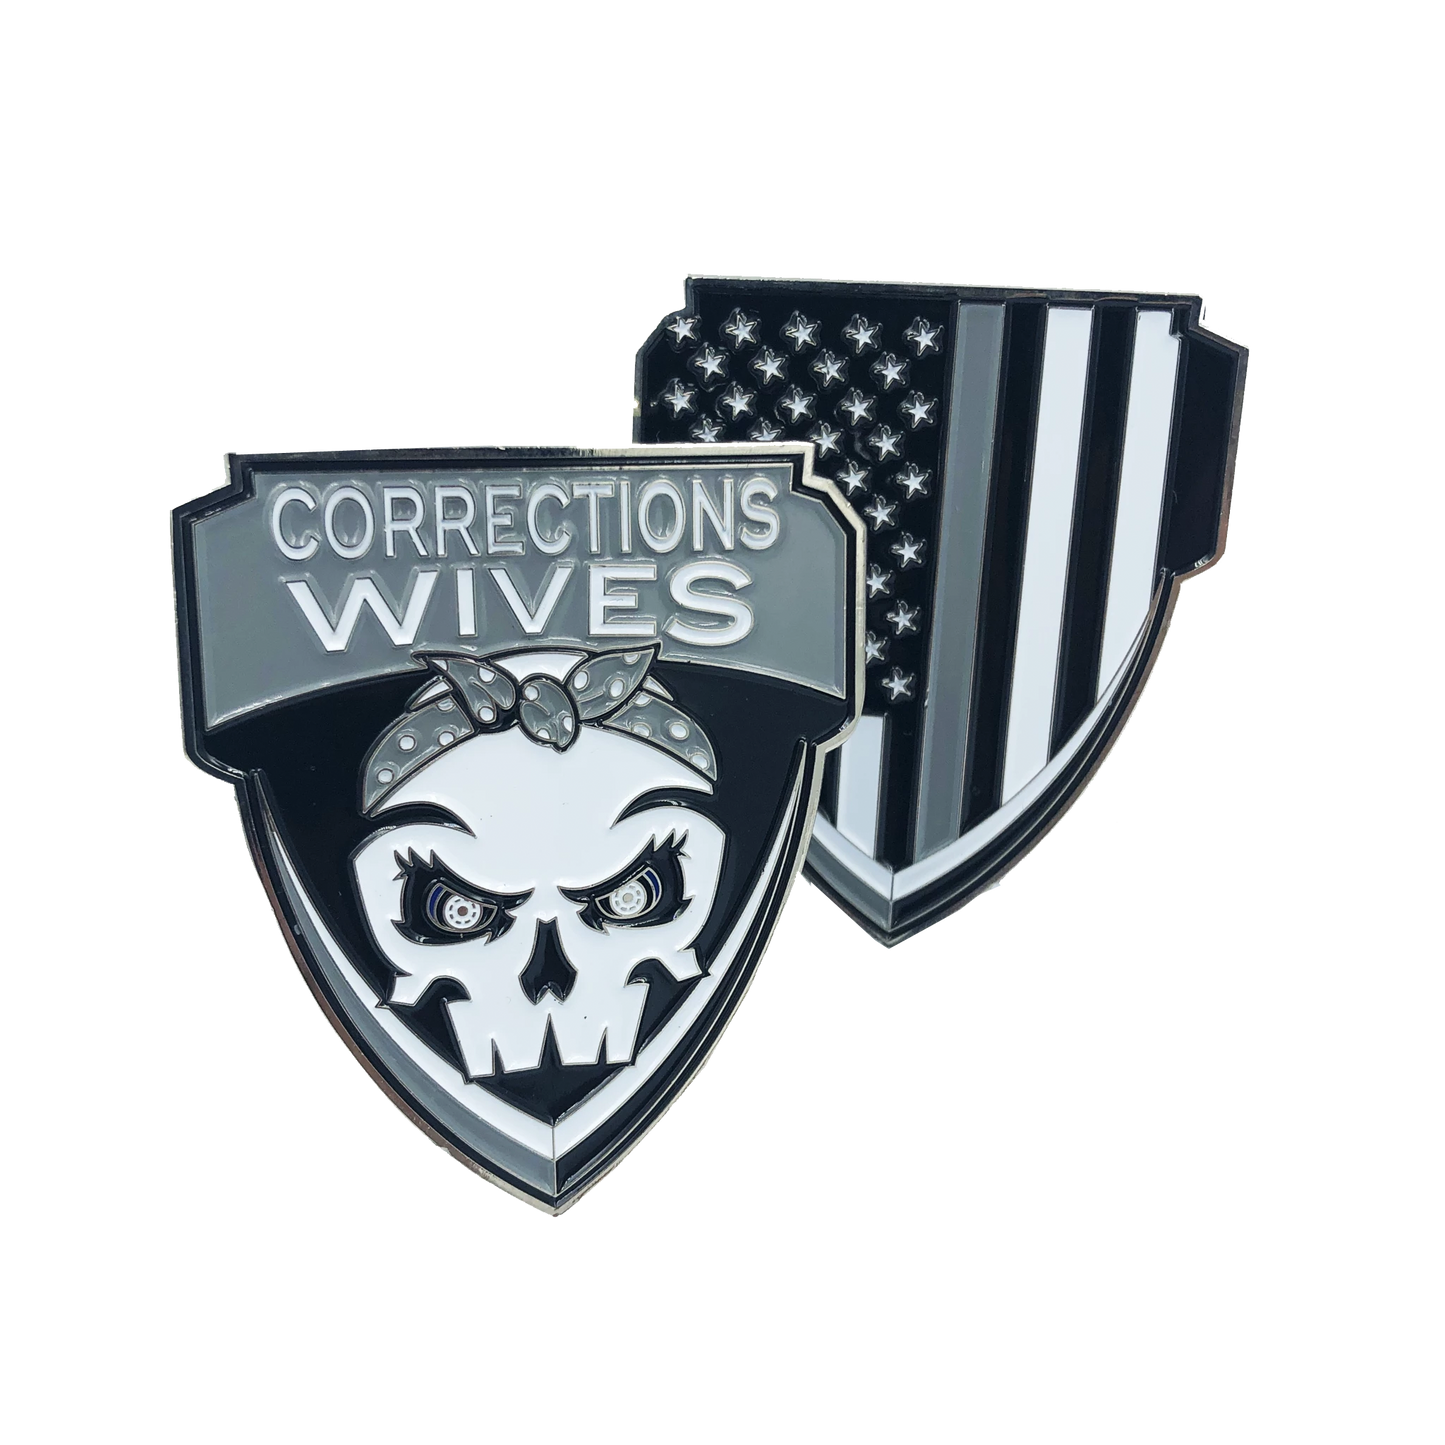 E-008 Corrections Wives Challenge Coin Thin Gray Line CO Correctional Officer Prison Jail wife